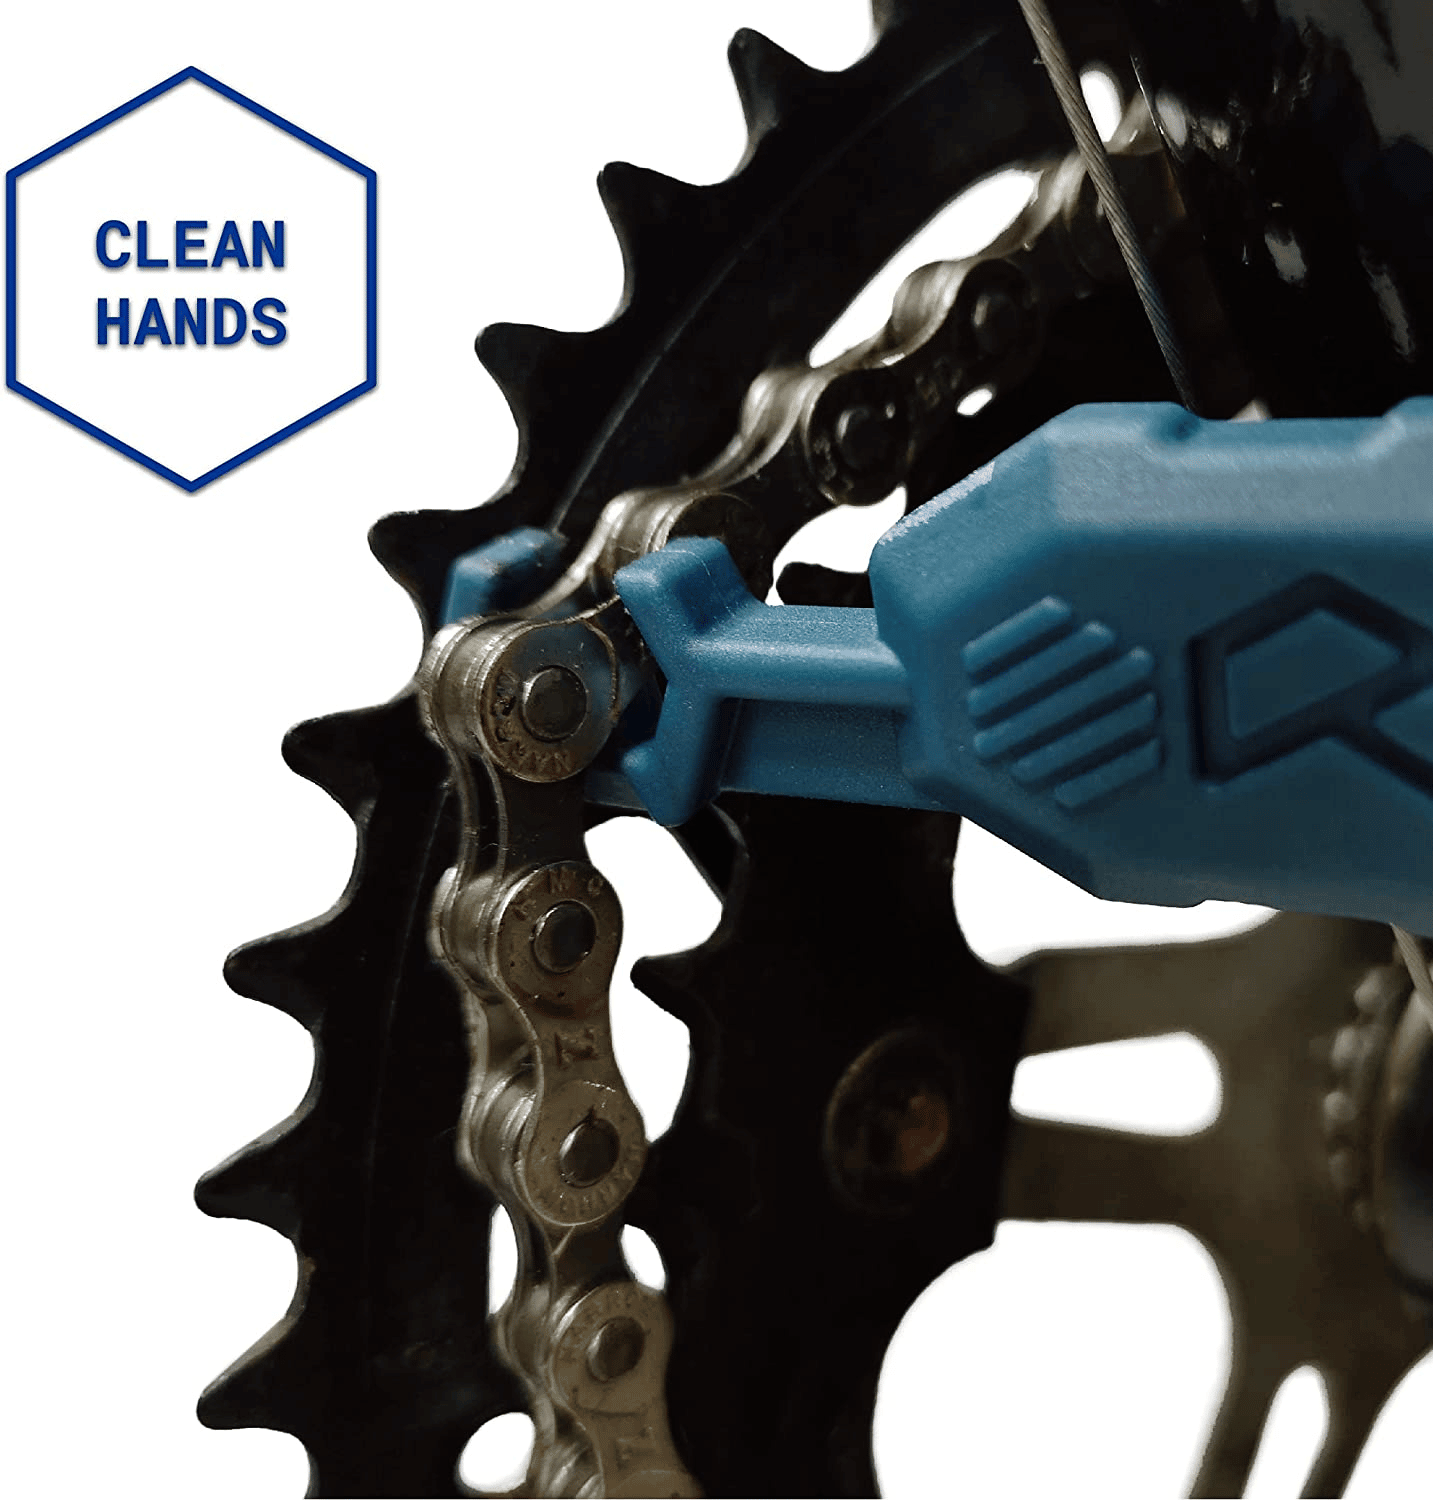 Use a rehook to get your chain out of places that your fingers cannot reach.